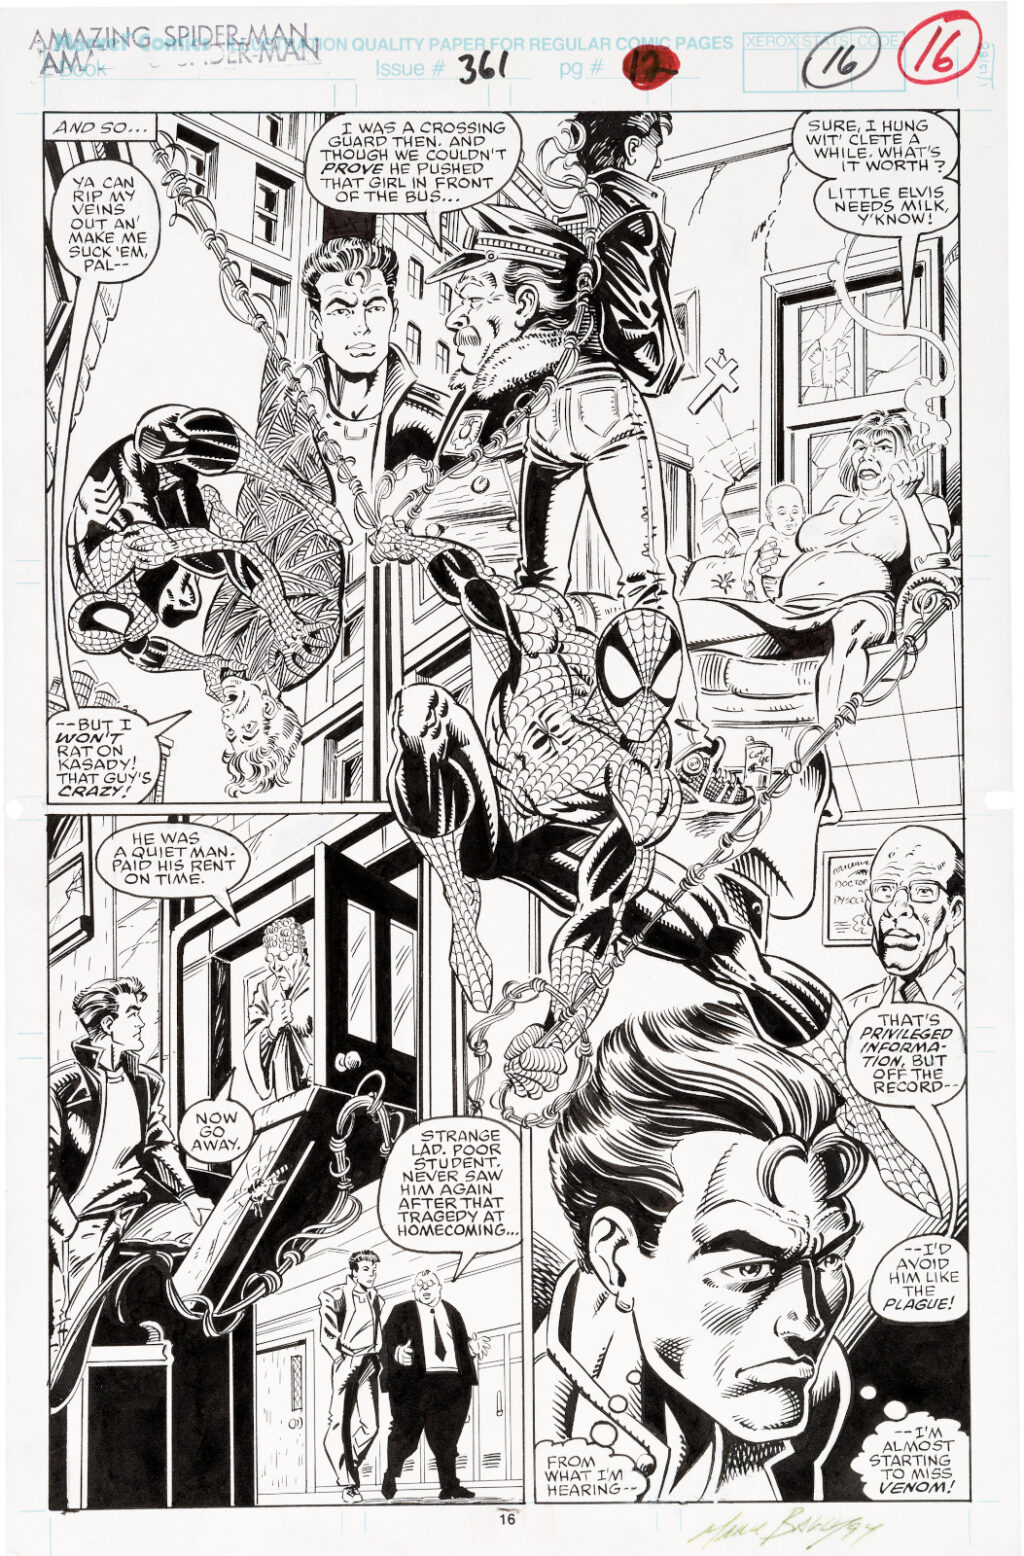 Amazing Spider Man issue 361 page 12 by Mark Bagley and Randy Emberlin